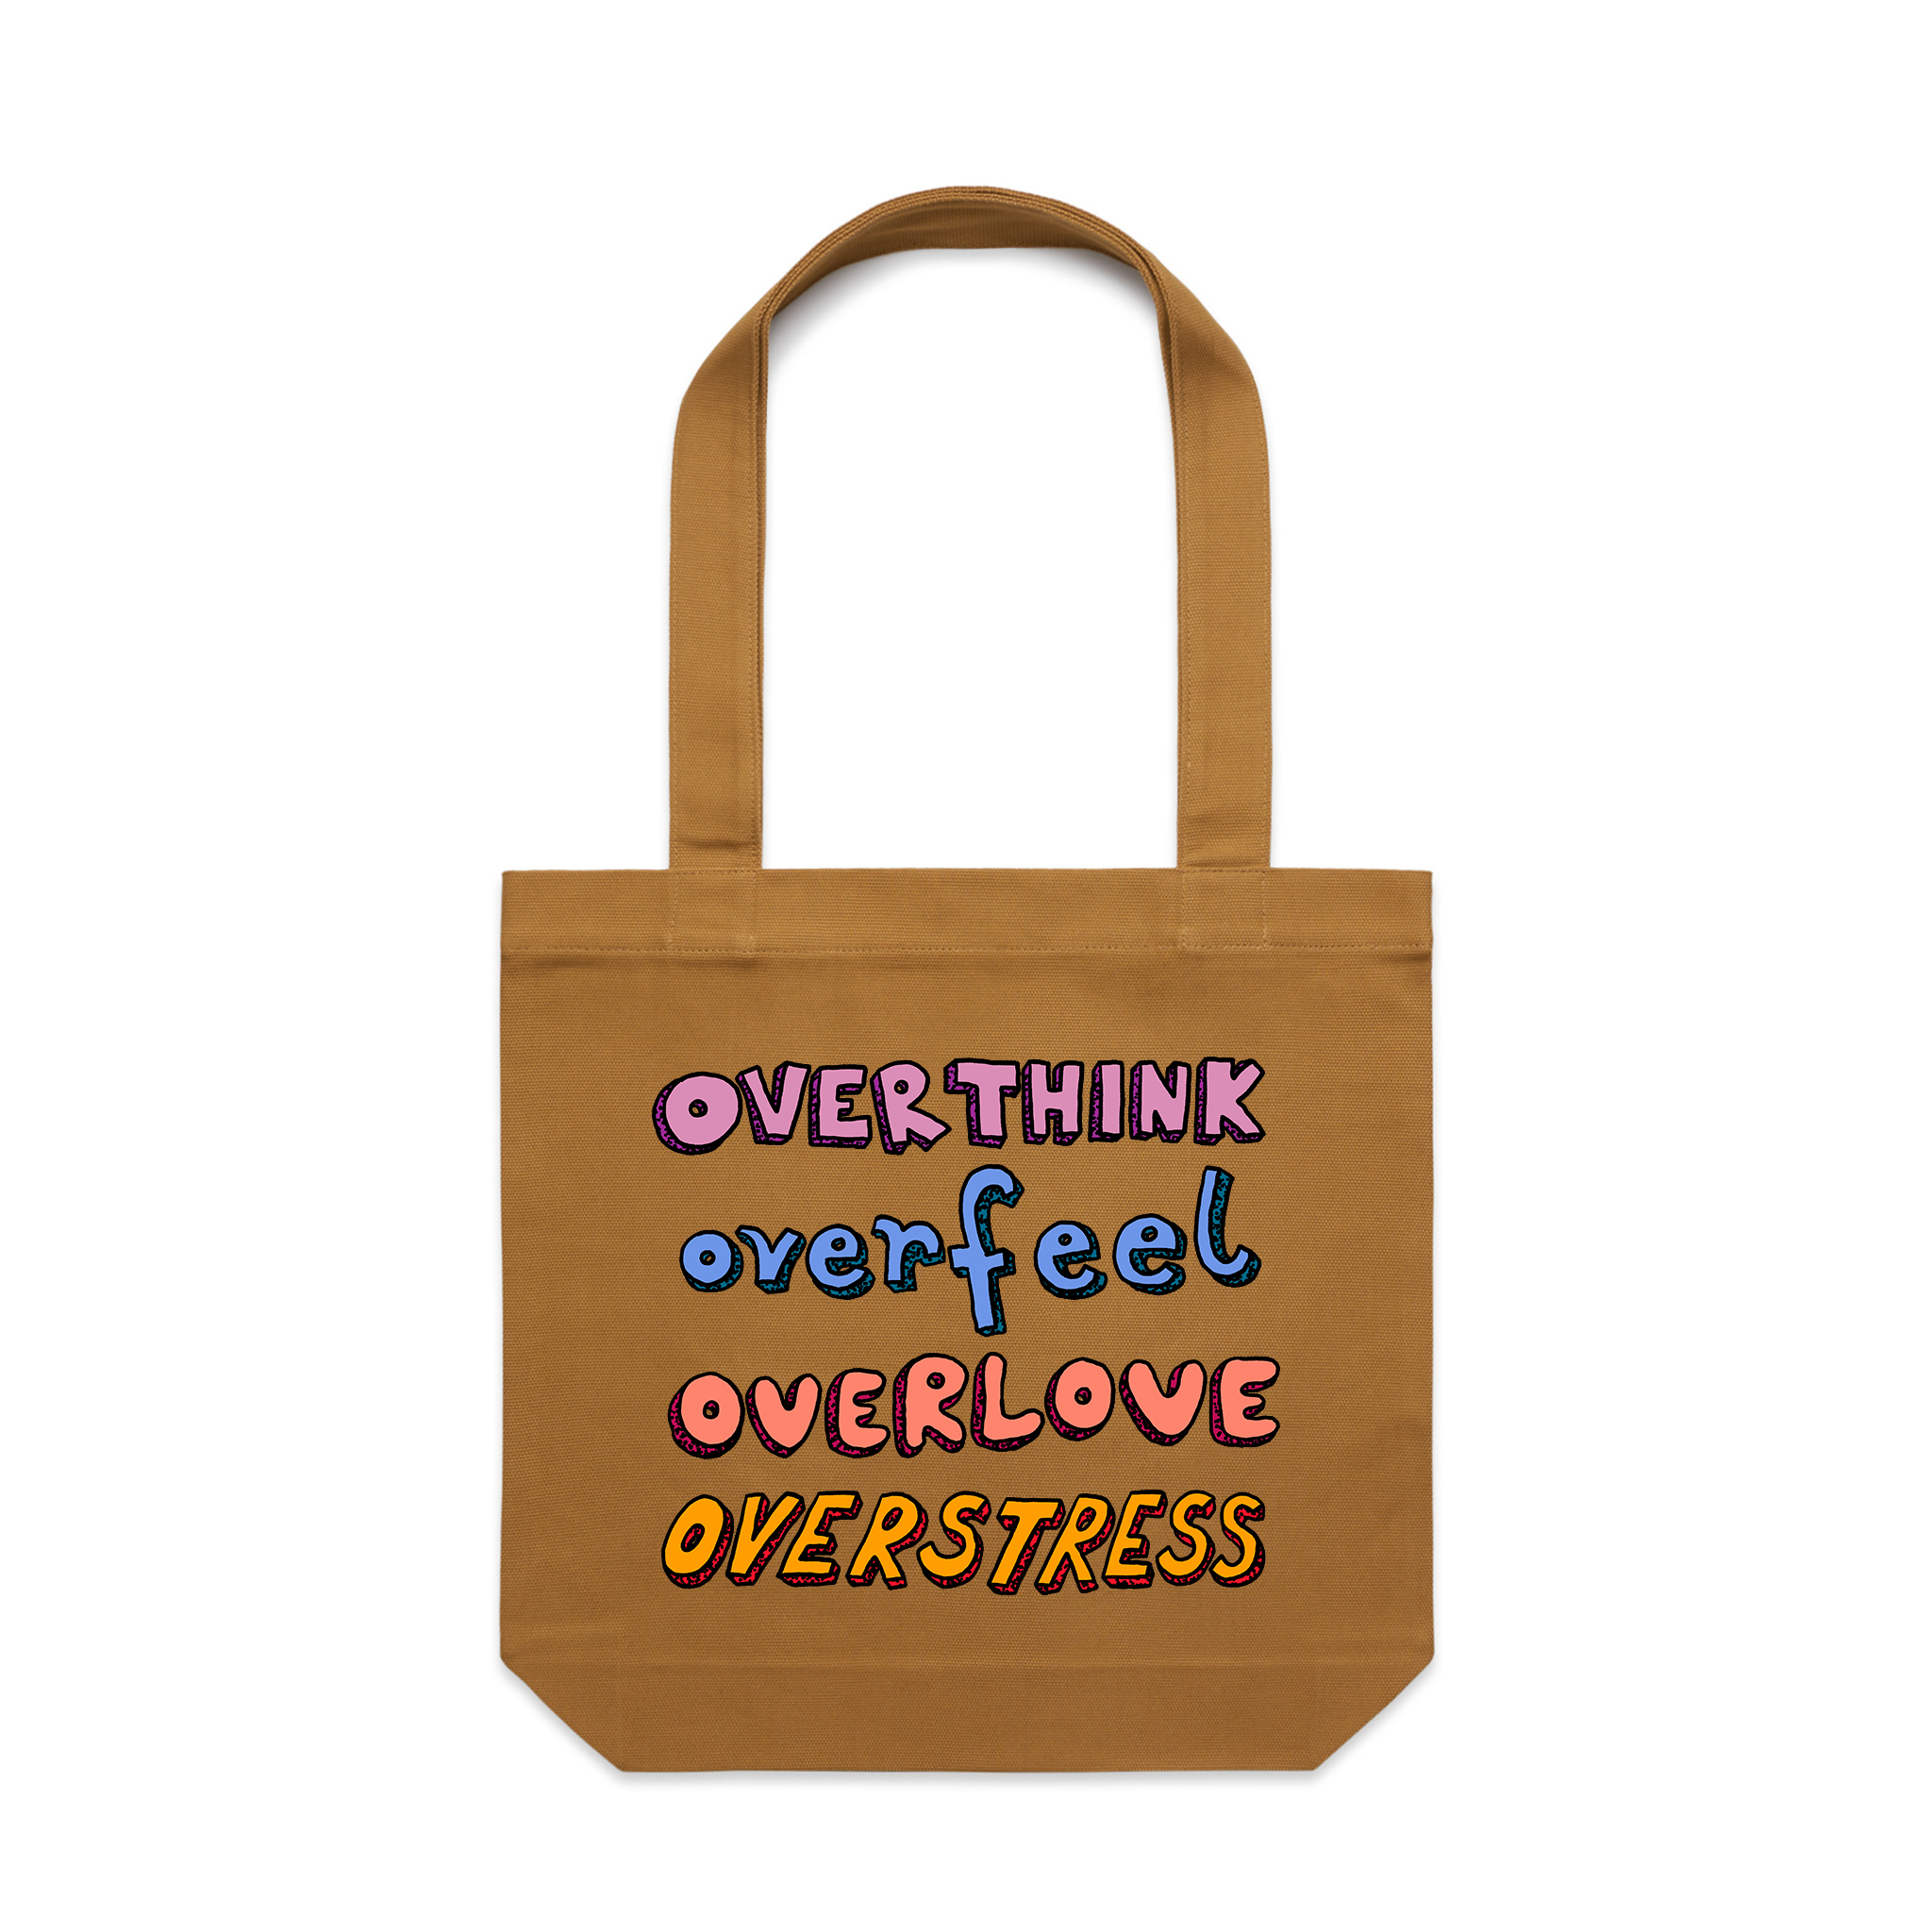 Over Everything Tote